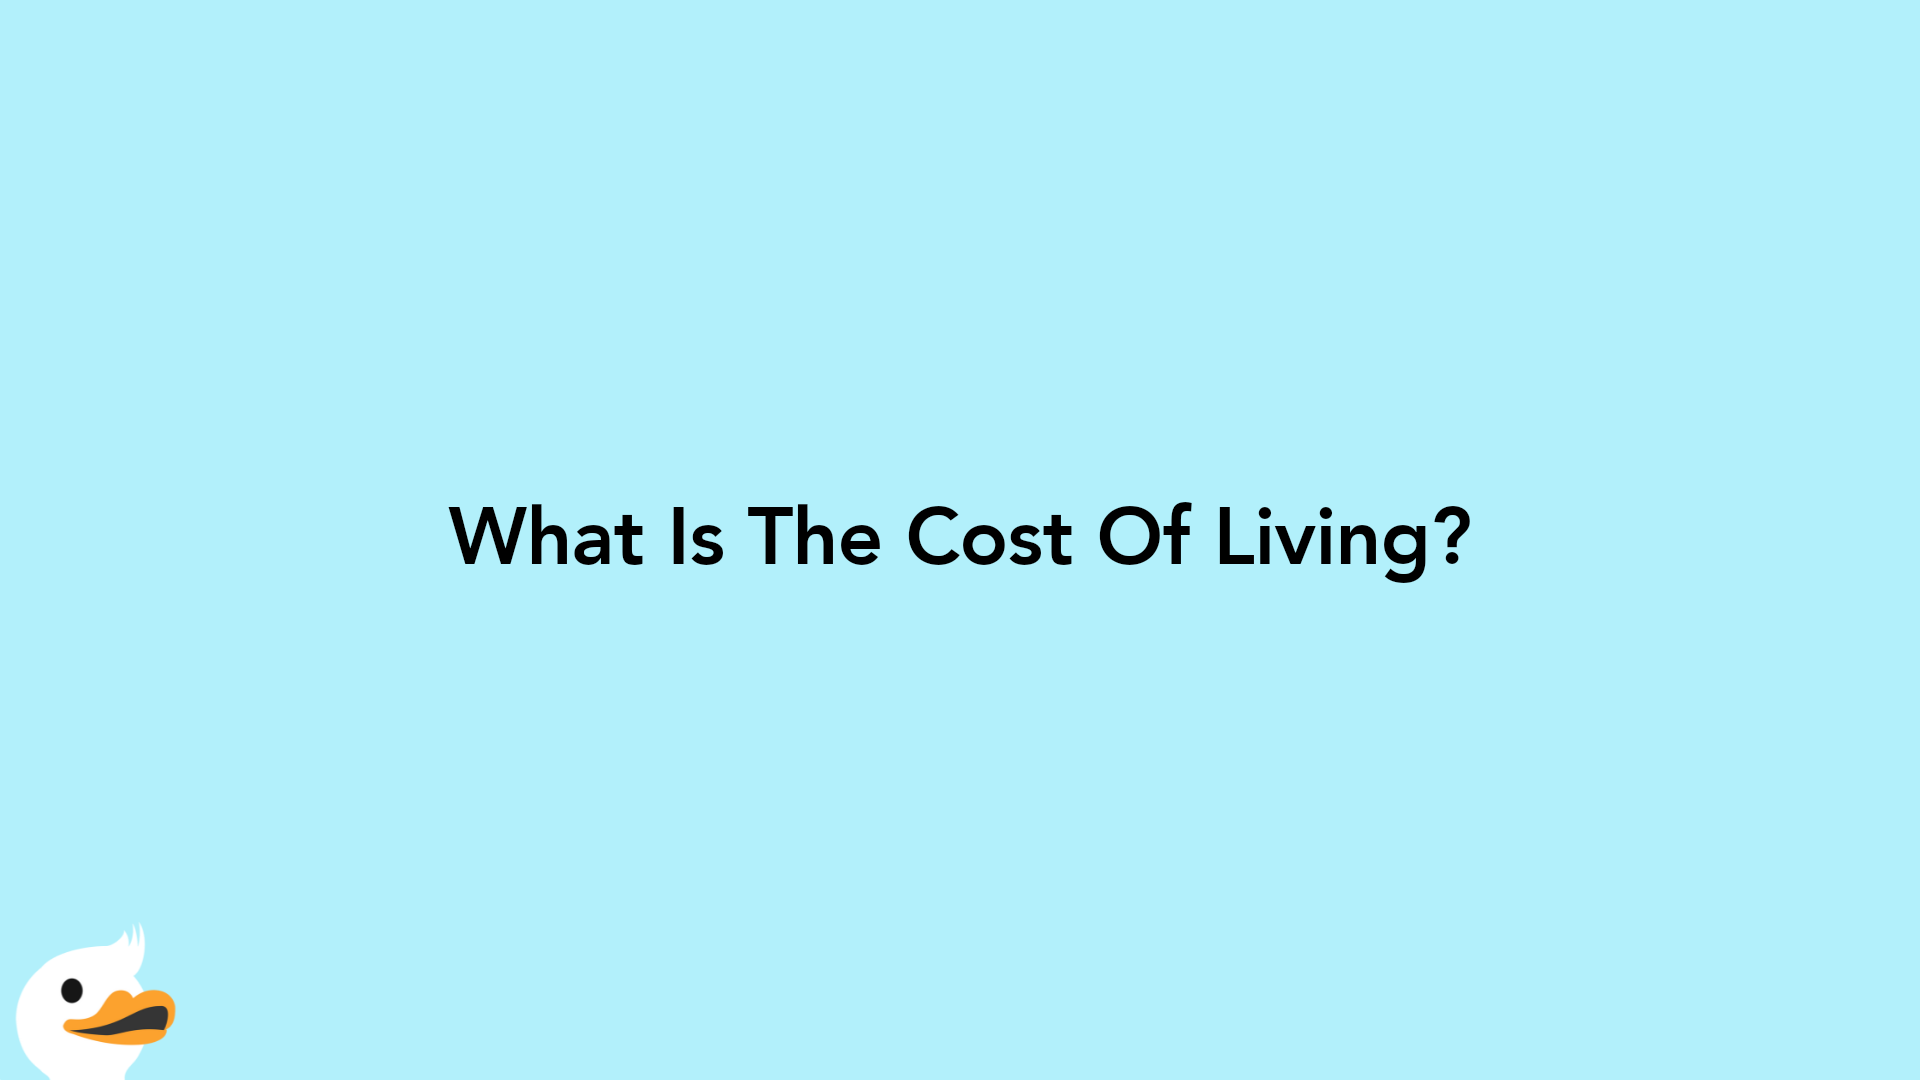 What Is The Cost Of Living?